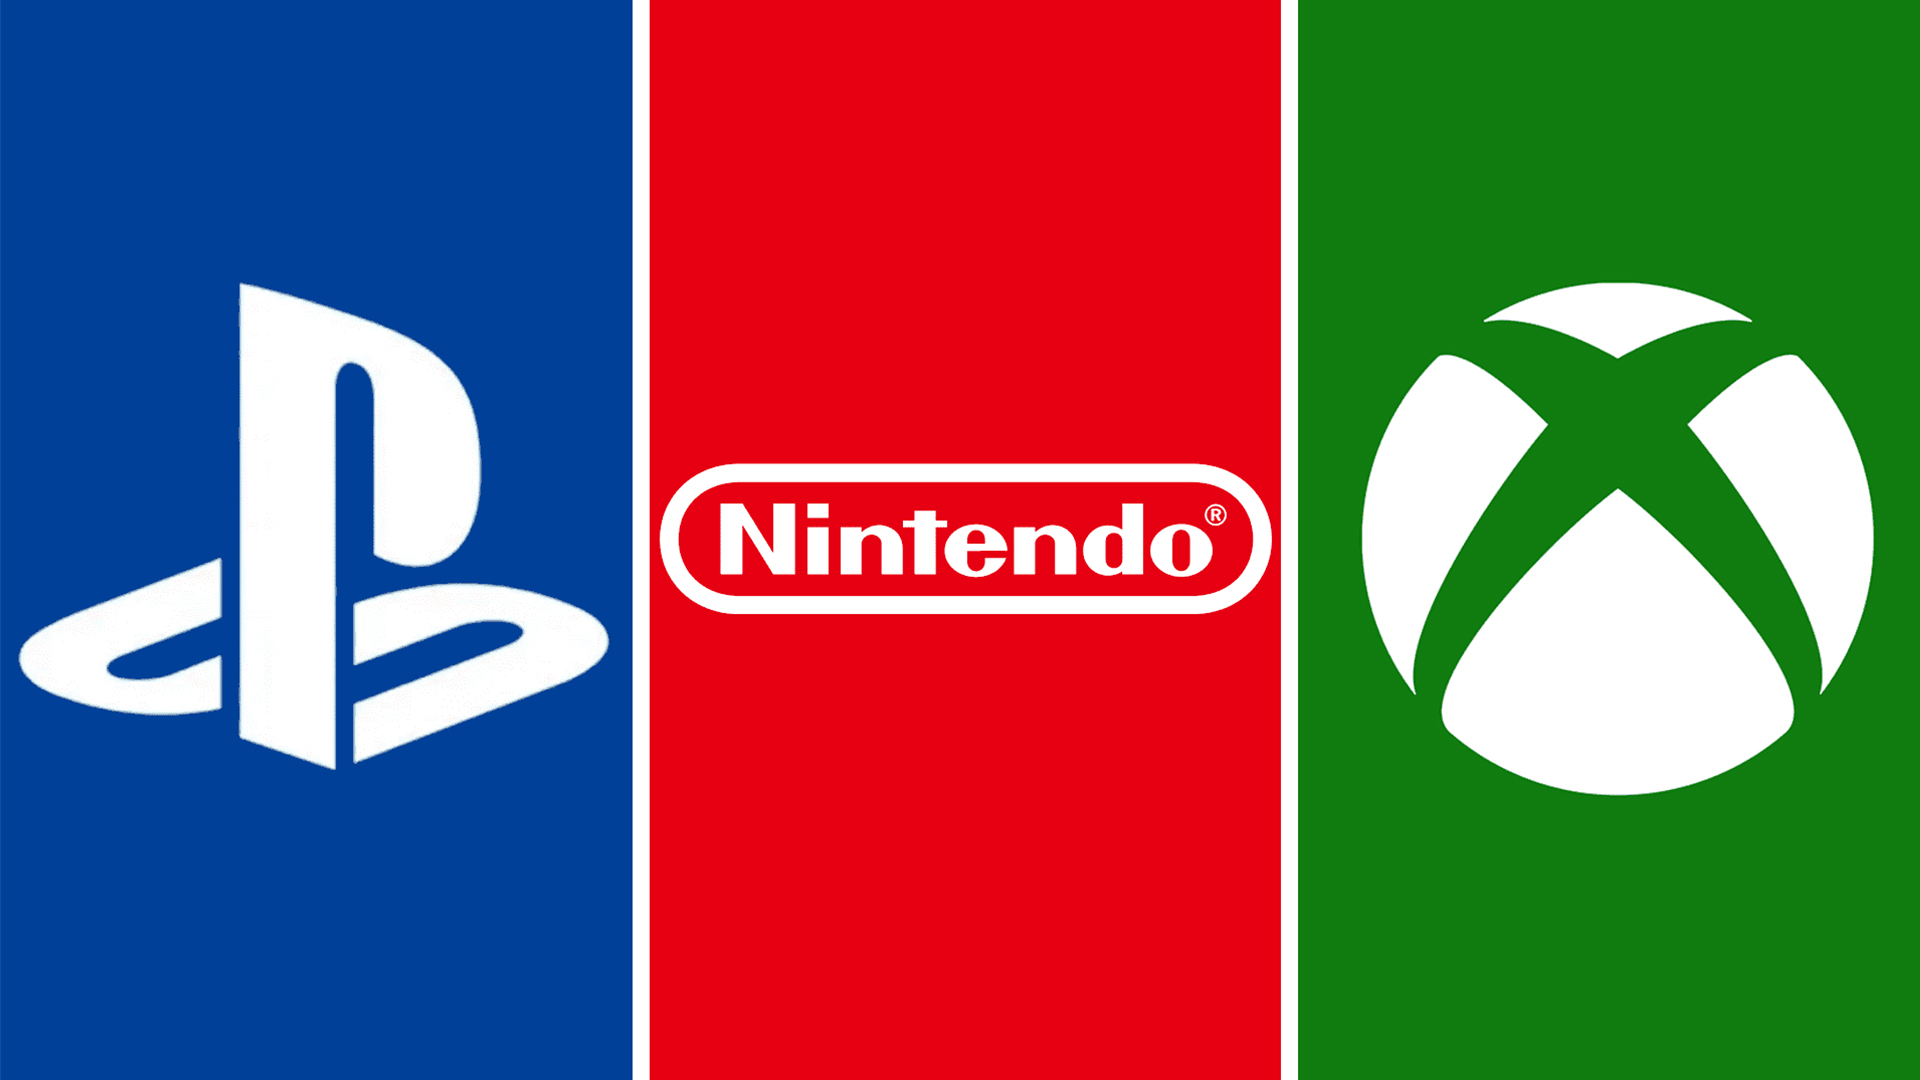 !@#$% on the future visions of Nintendo, PlayStation, and Xbox